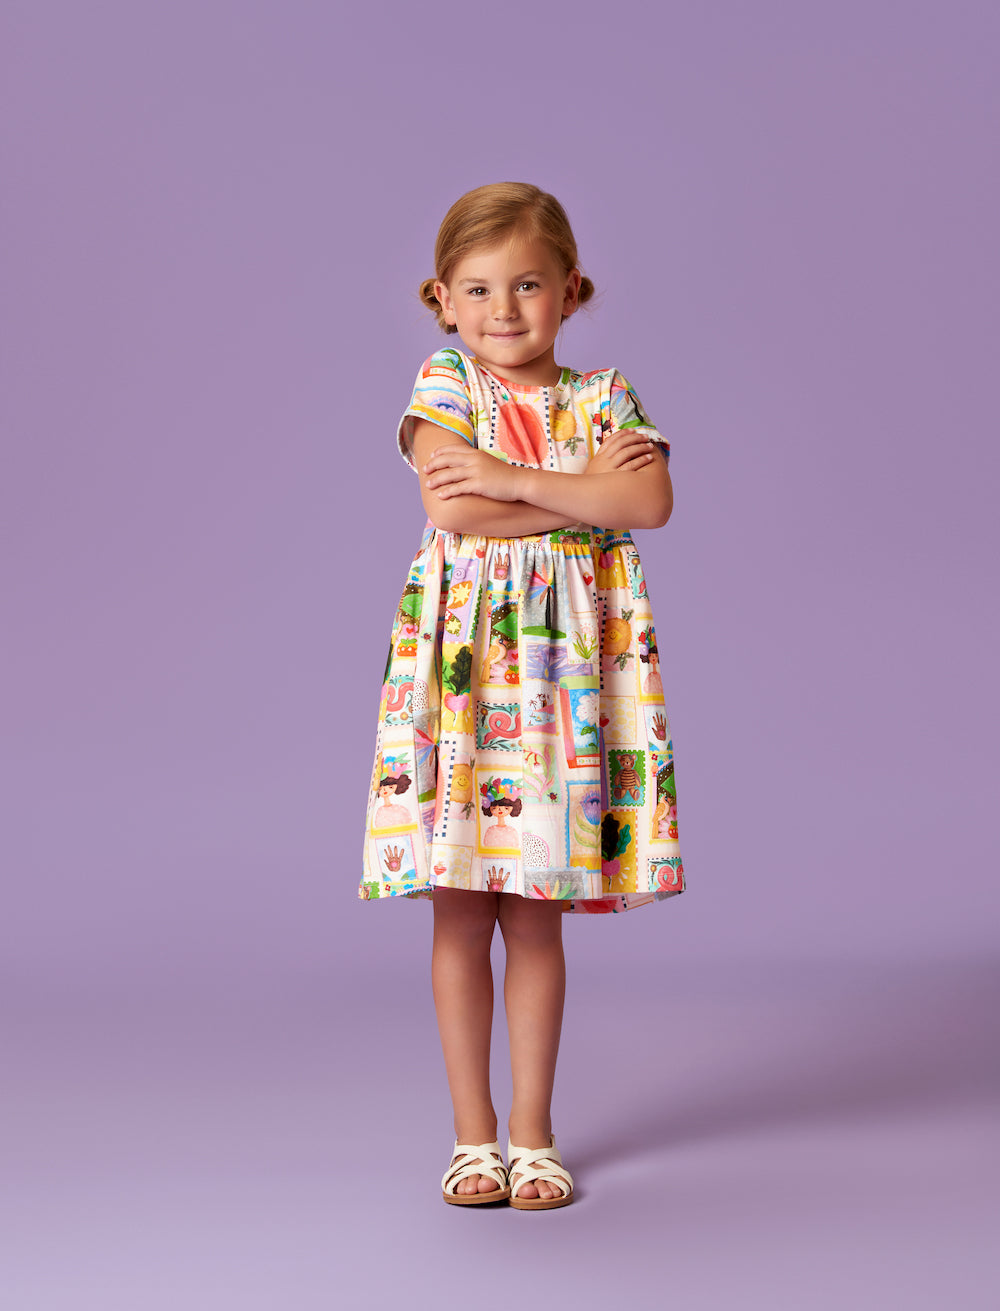 Doliday Cards Jersey Dress by Oilily